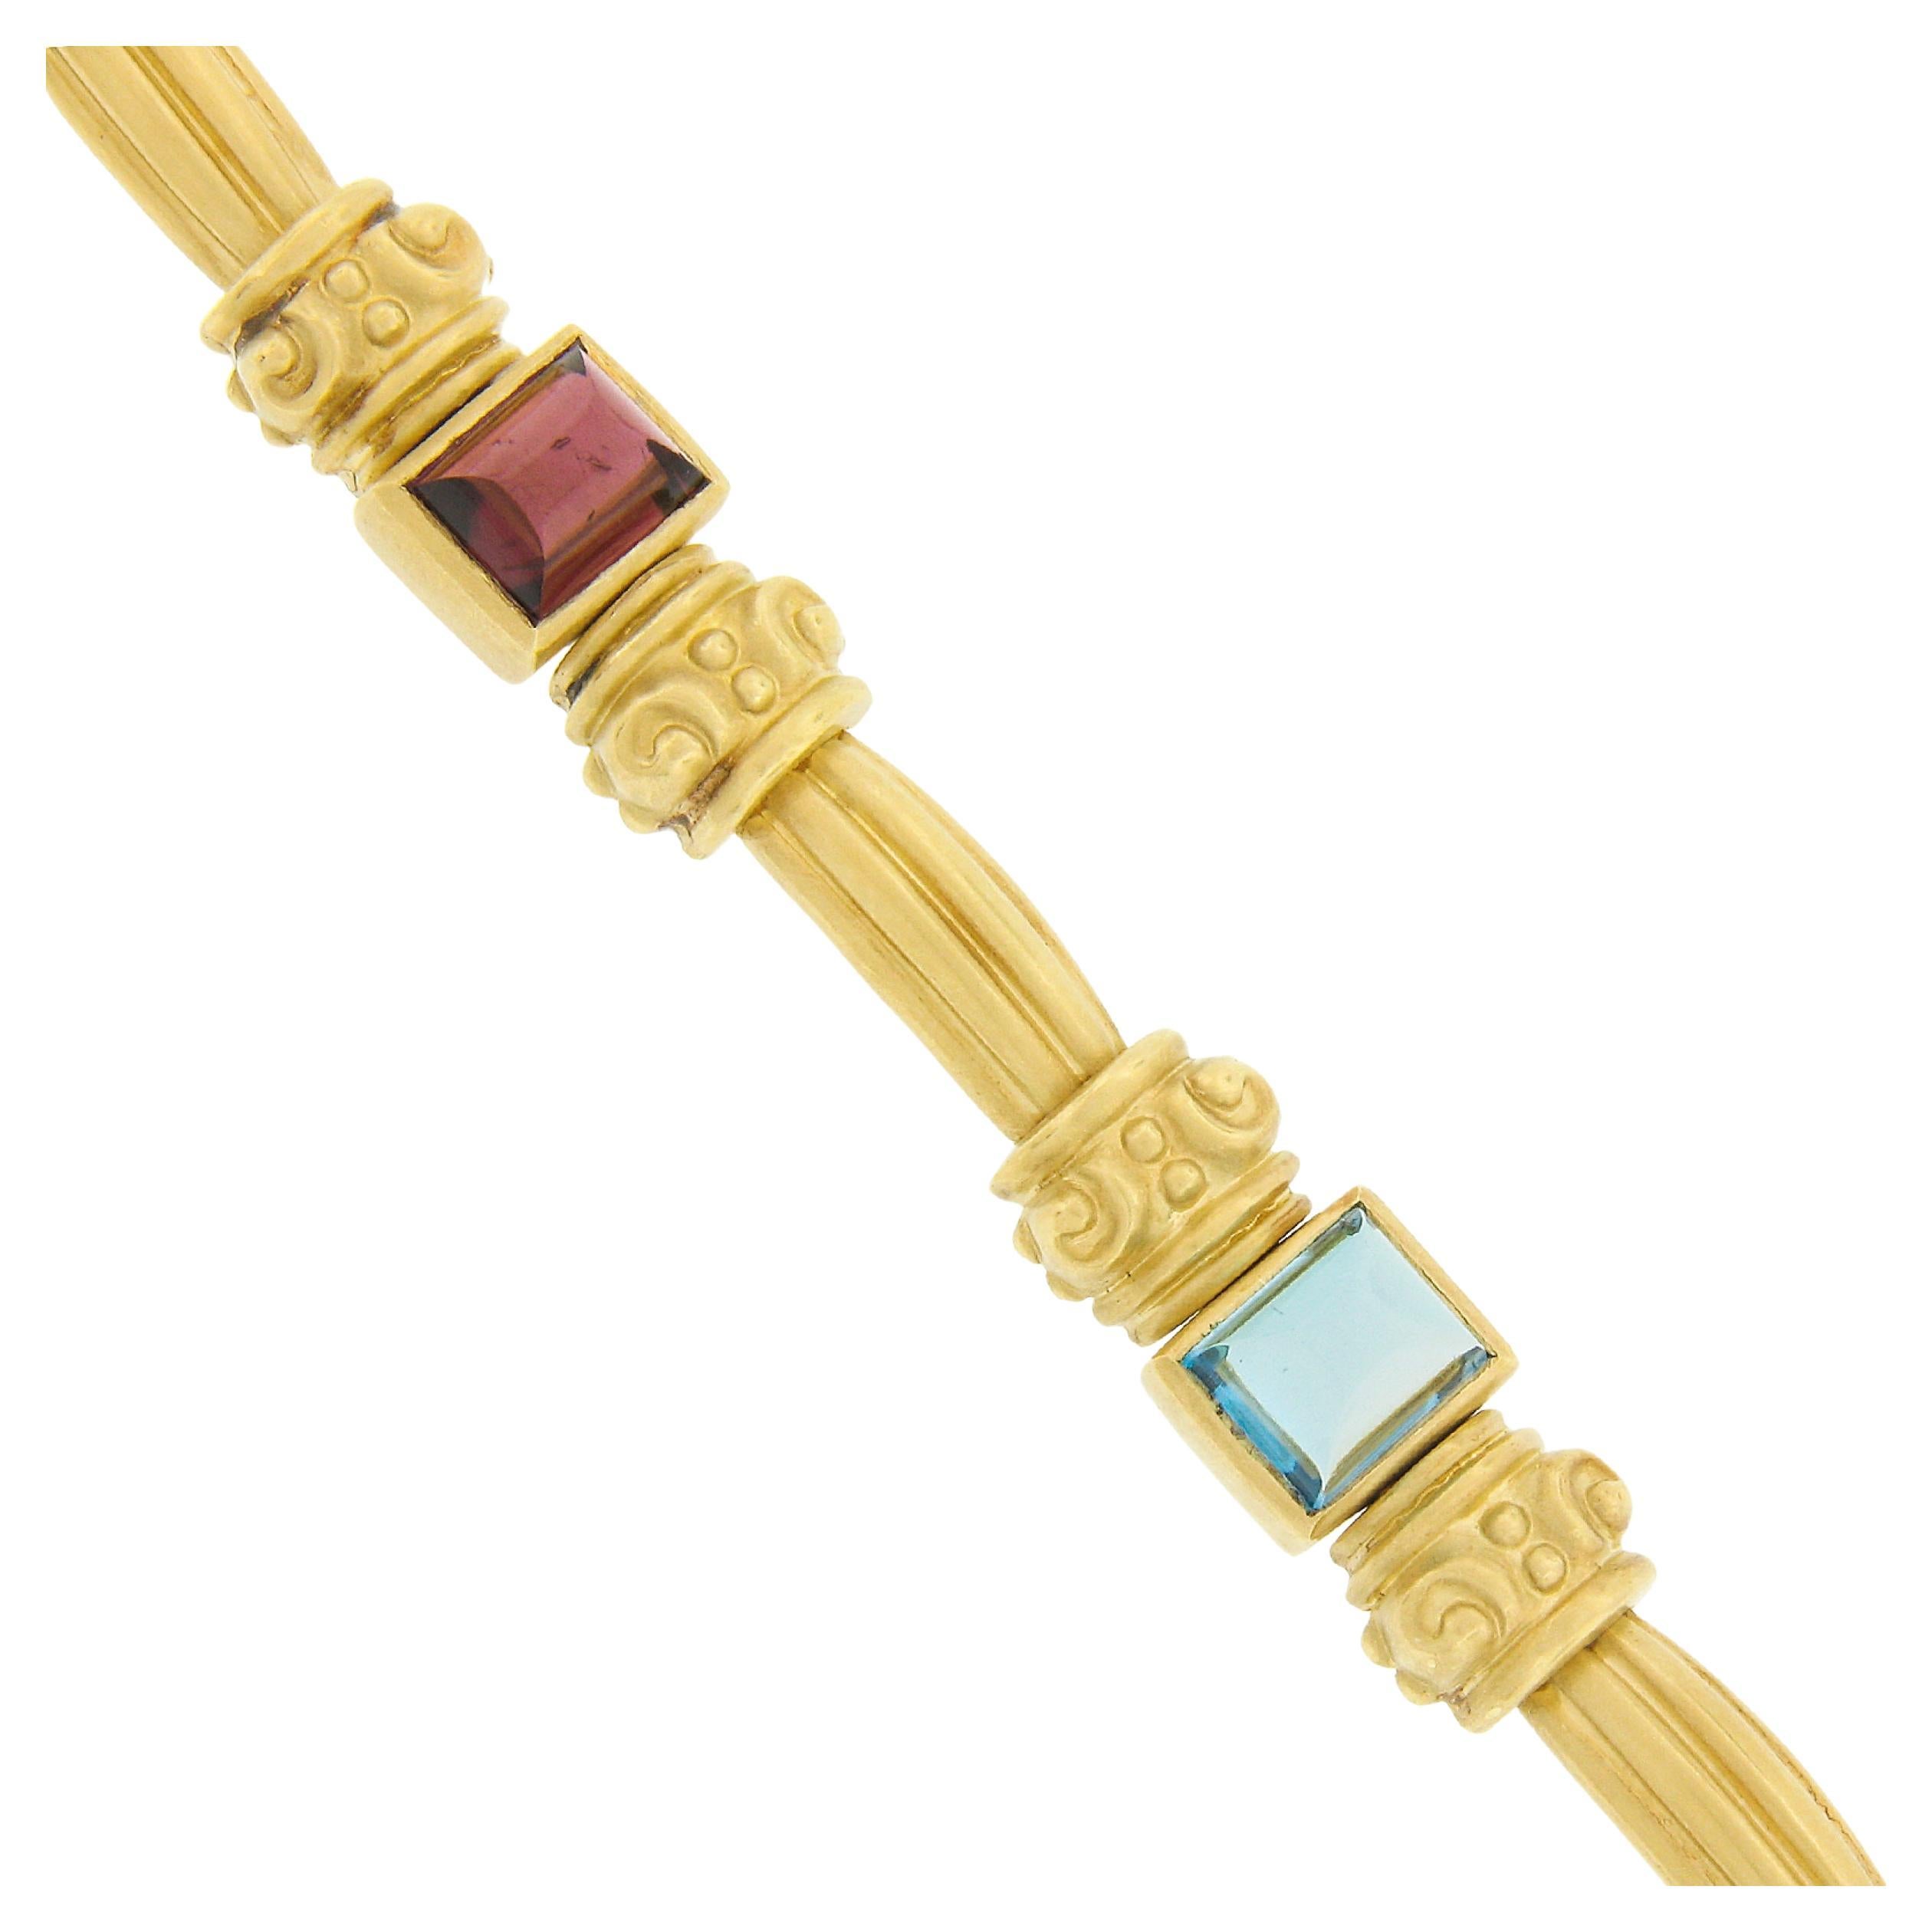 This uniquely designed and well made vintage statement bracelet is crafted in solid 18k yellow gold and features 4 natural genuine gemstones that are neatly bezel set throughout. These high quality rectangular cabochon cut stones include amethyst,